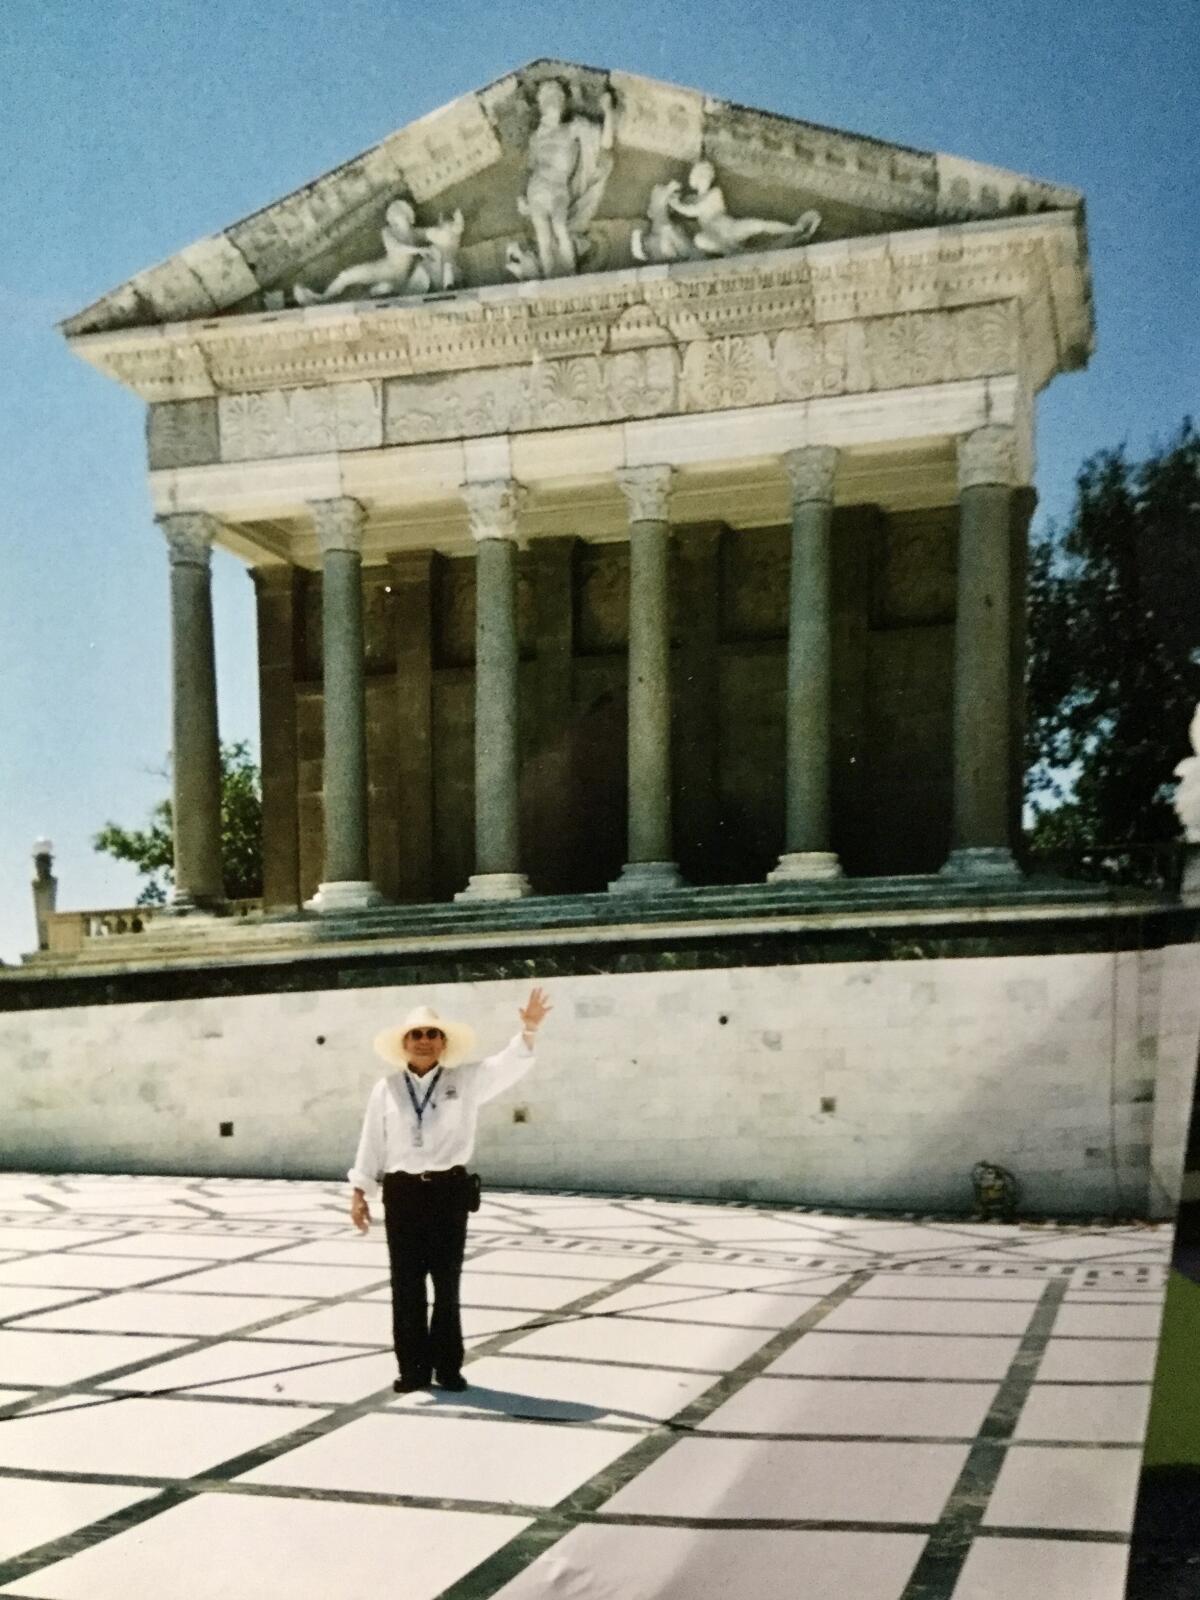 A man waves as he stands in a large, empty pool.